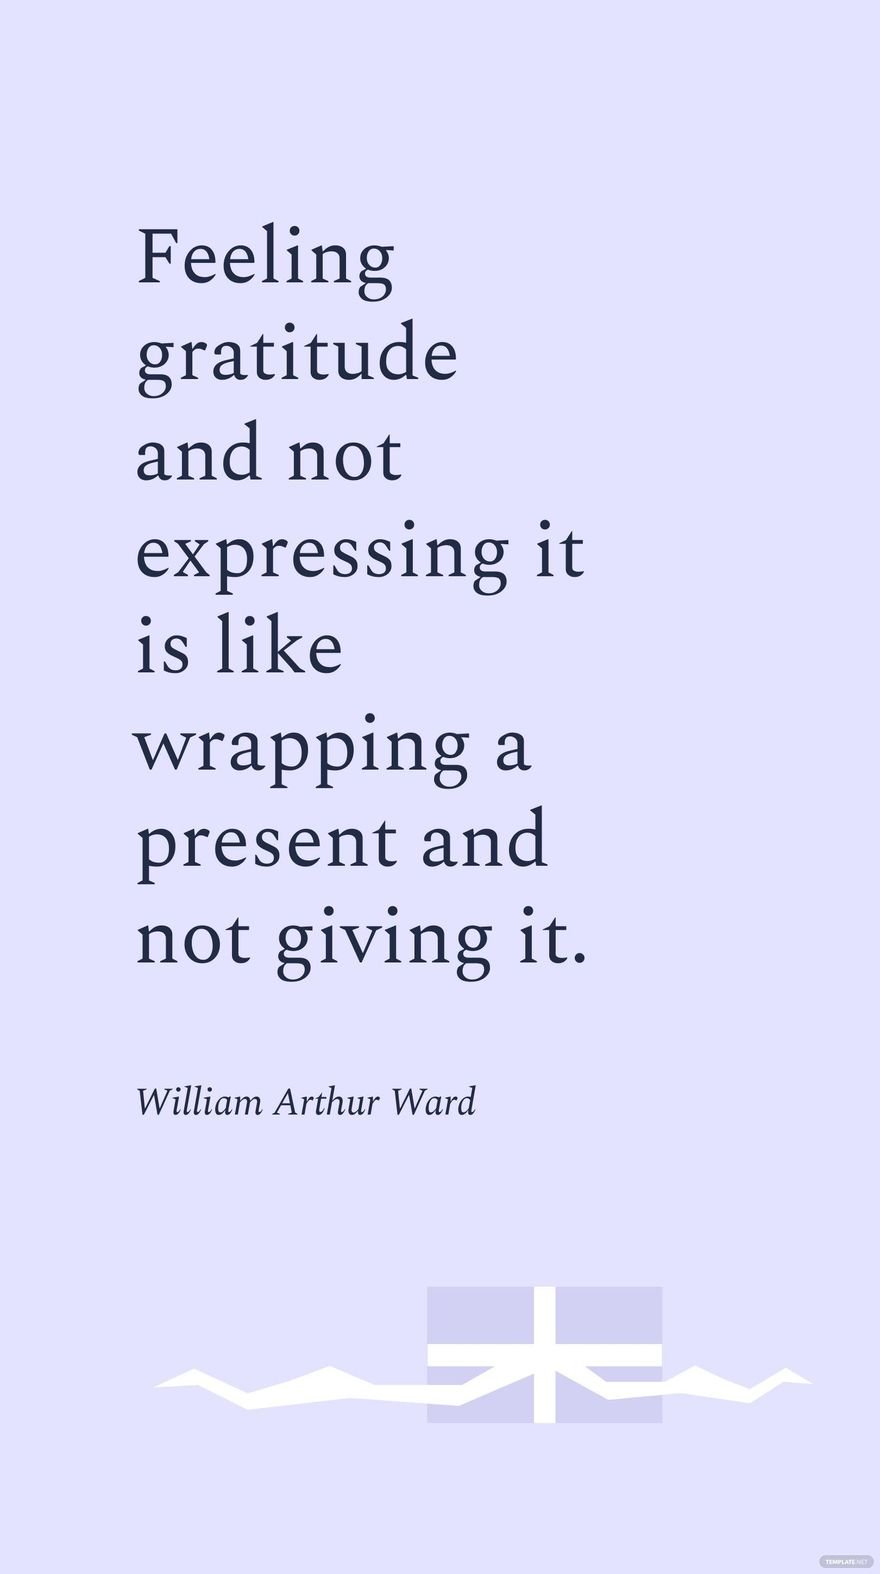 Free William Arthur Ward - Feeling gratitude and not expressing it is like wrapping a present and not giving it.  in JPG